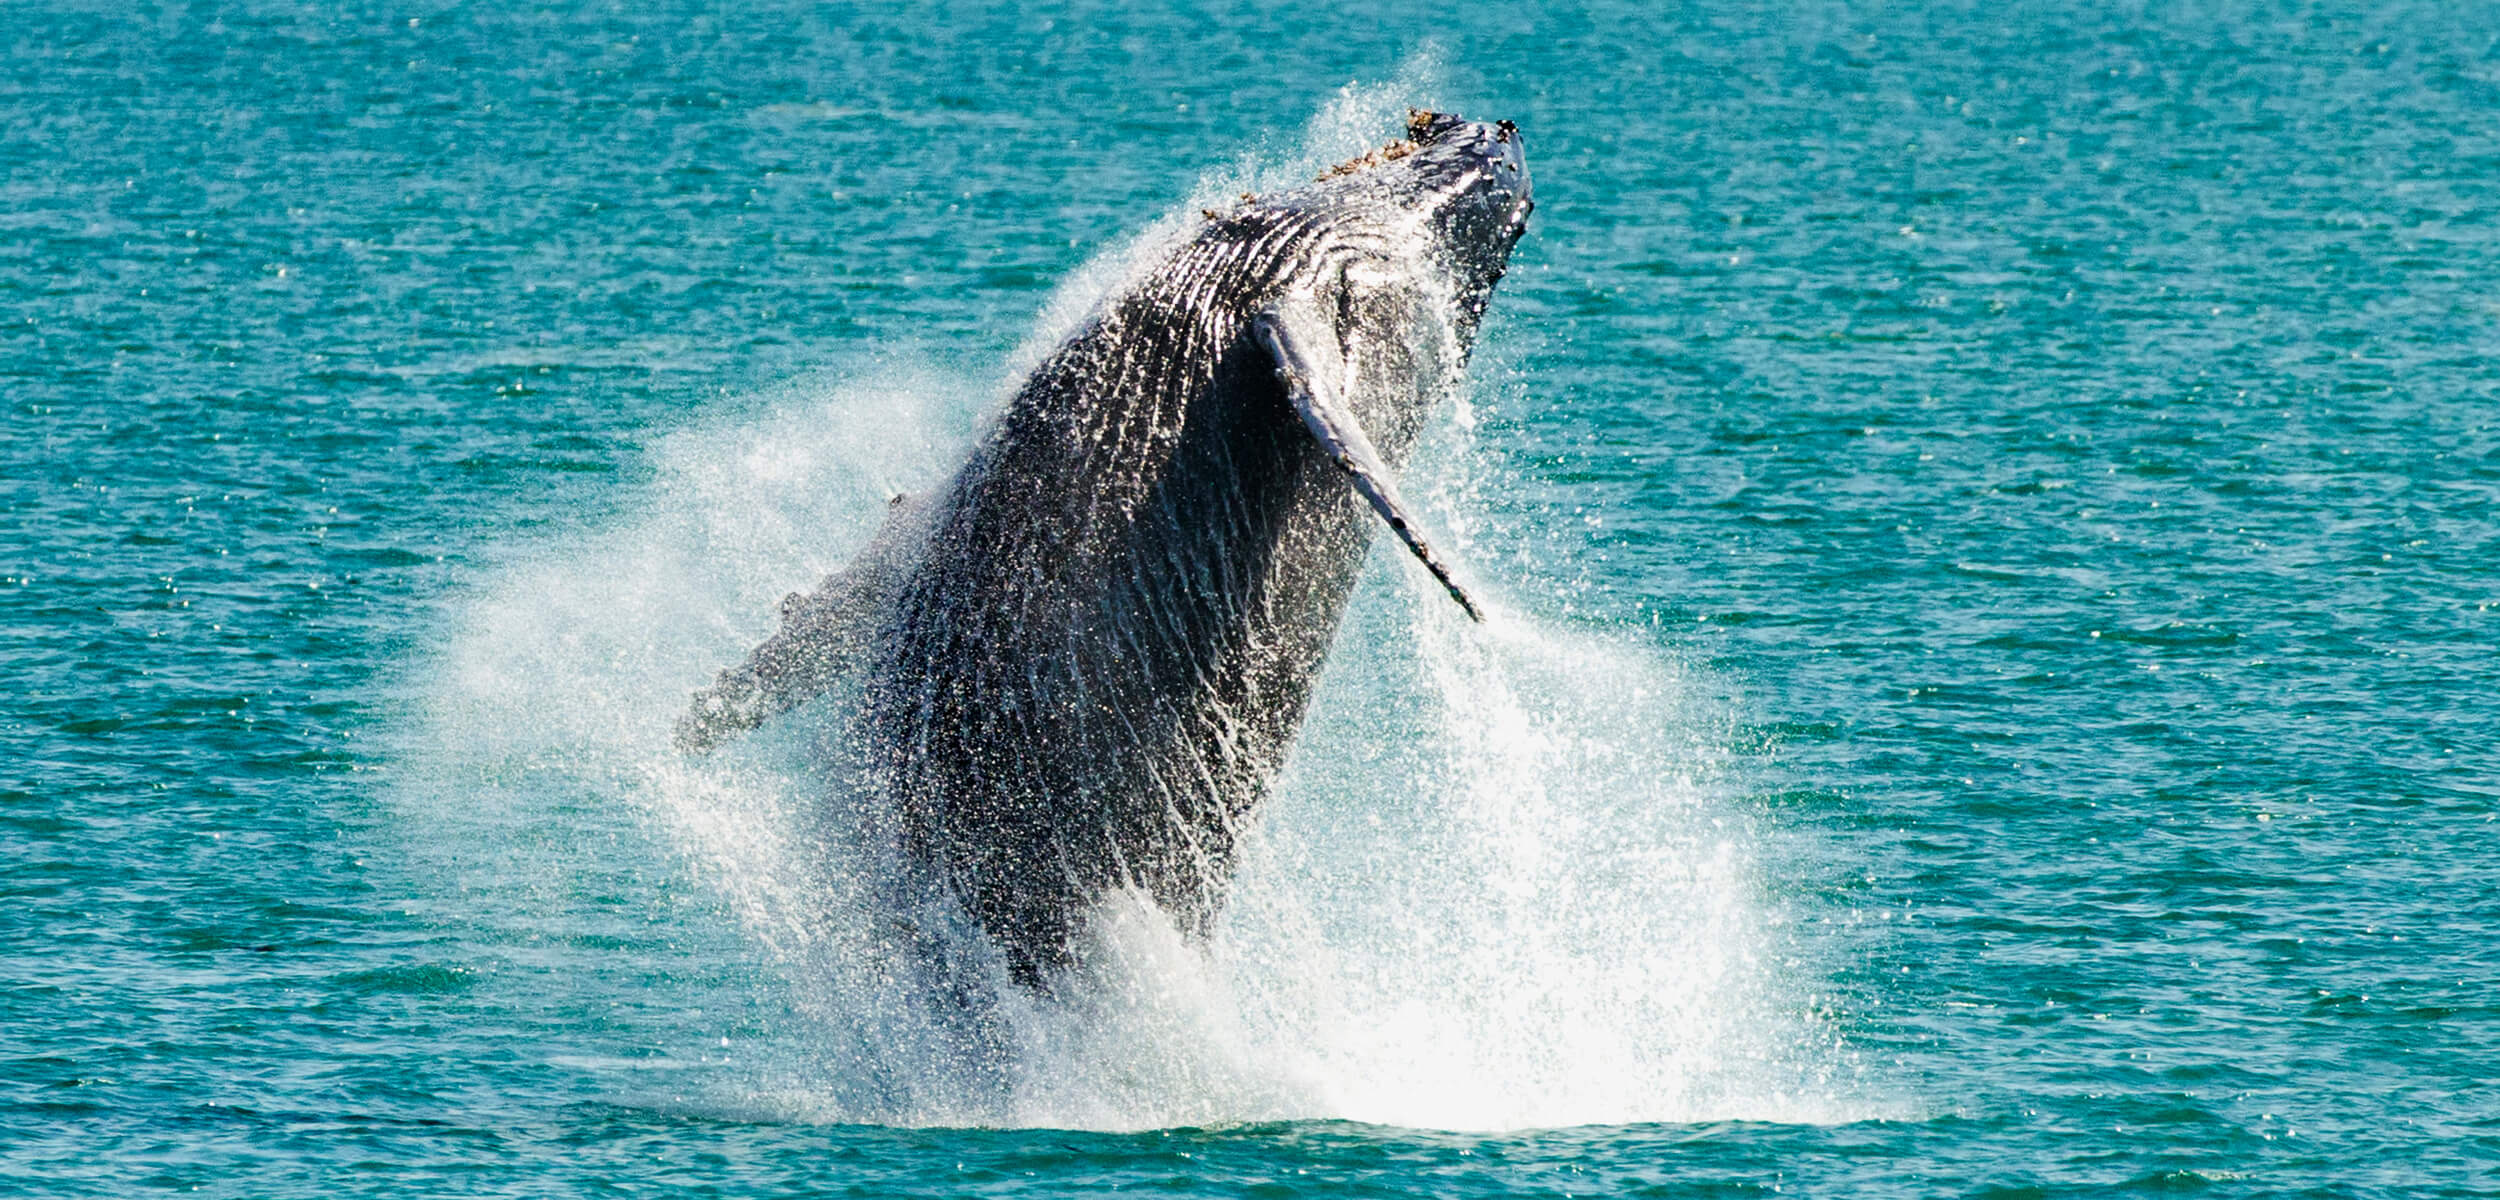 Humpback Whale in the Kiama Region, Photography by Lachlan Hall